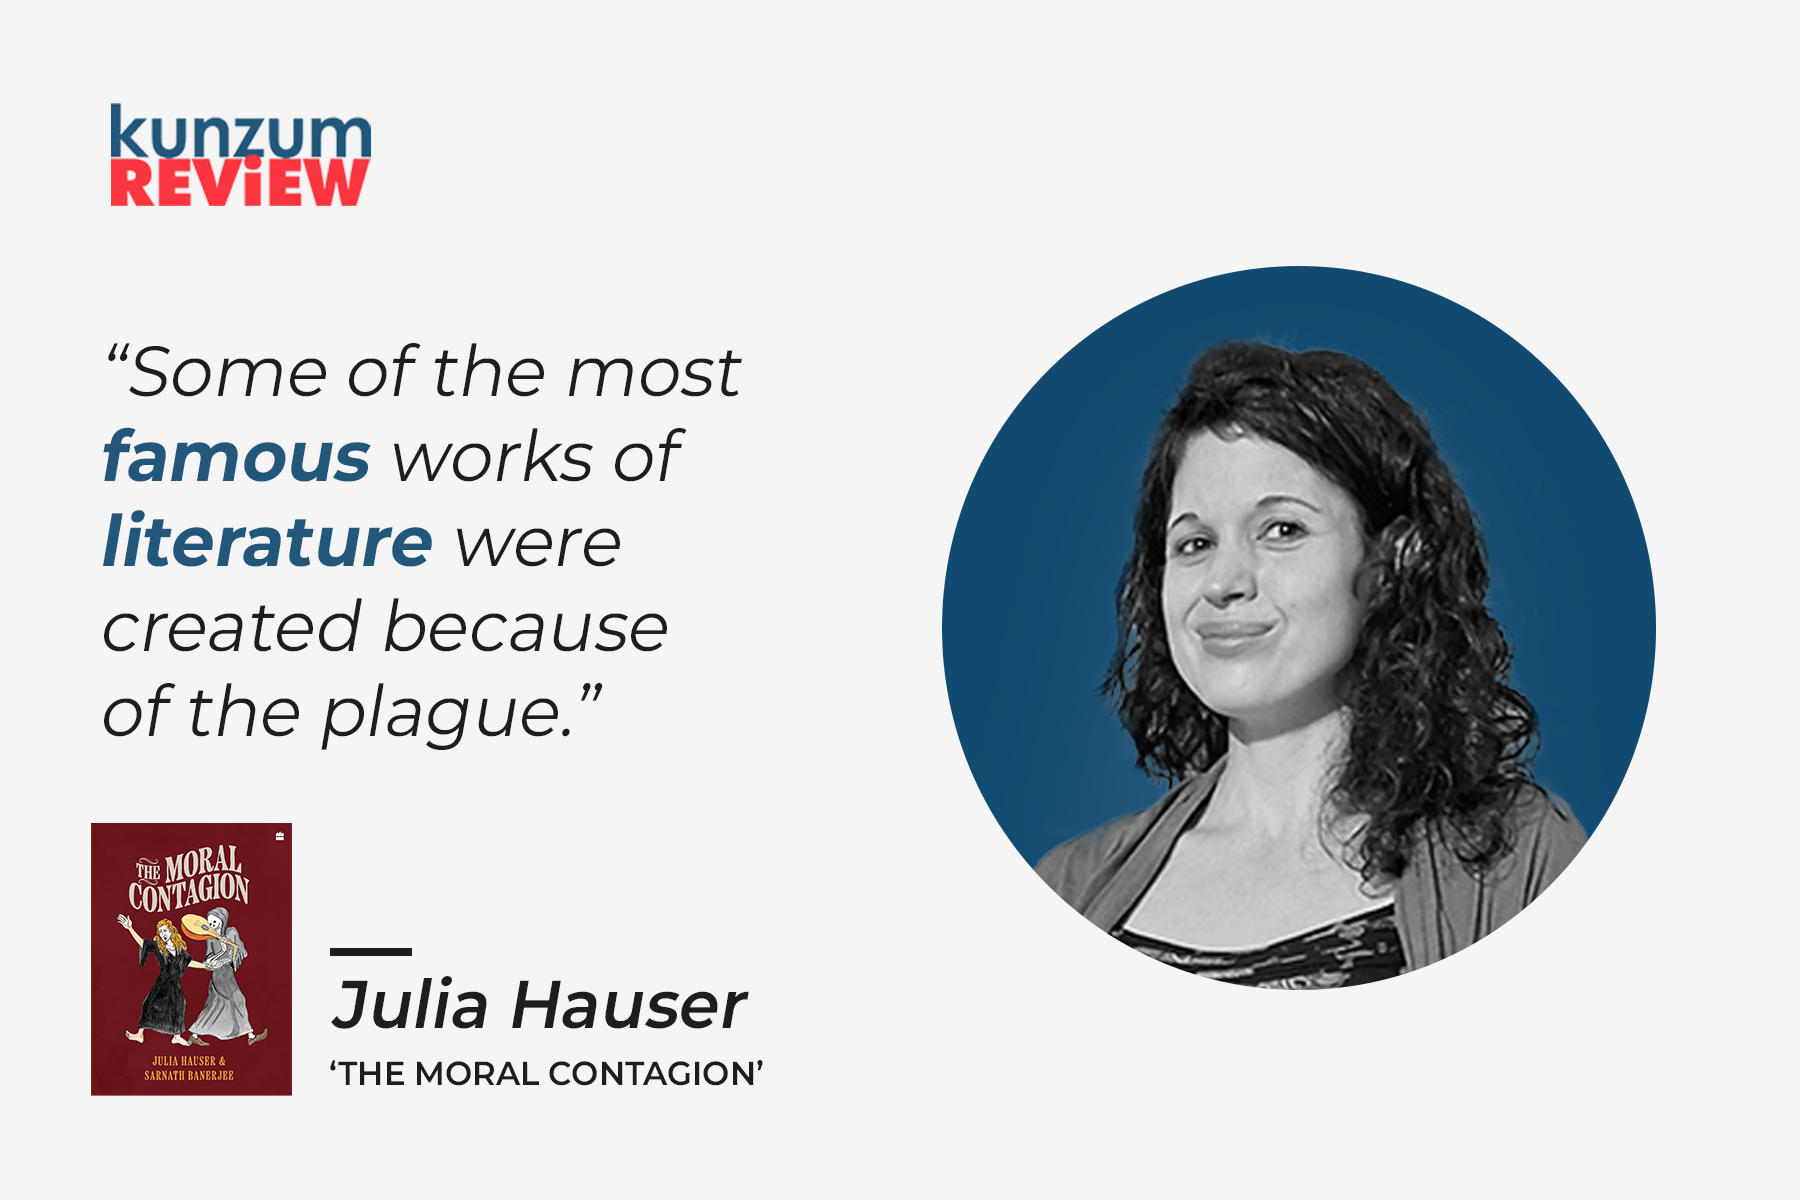 Author Interview: Plagues Had a Huge Impact on our Society, Says Julia Hauser